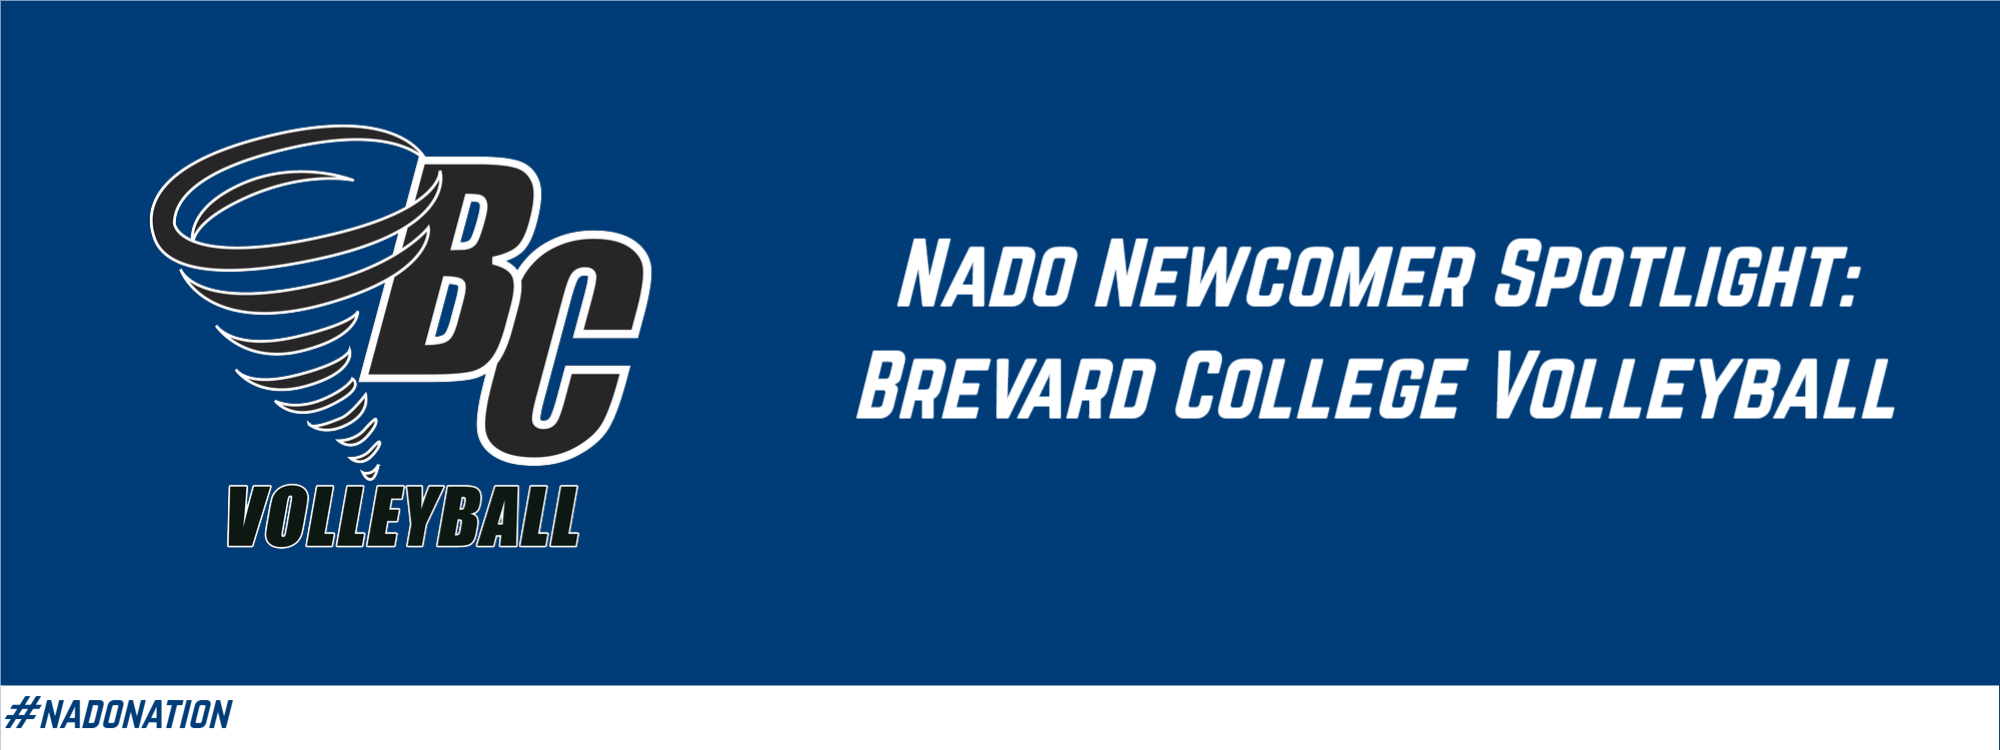 Nado Newcomer Spotlight: Volleyball Welcomes 8 to 2020-21 Squad